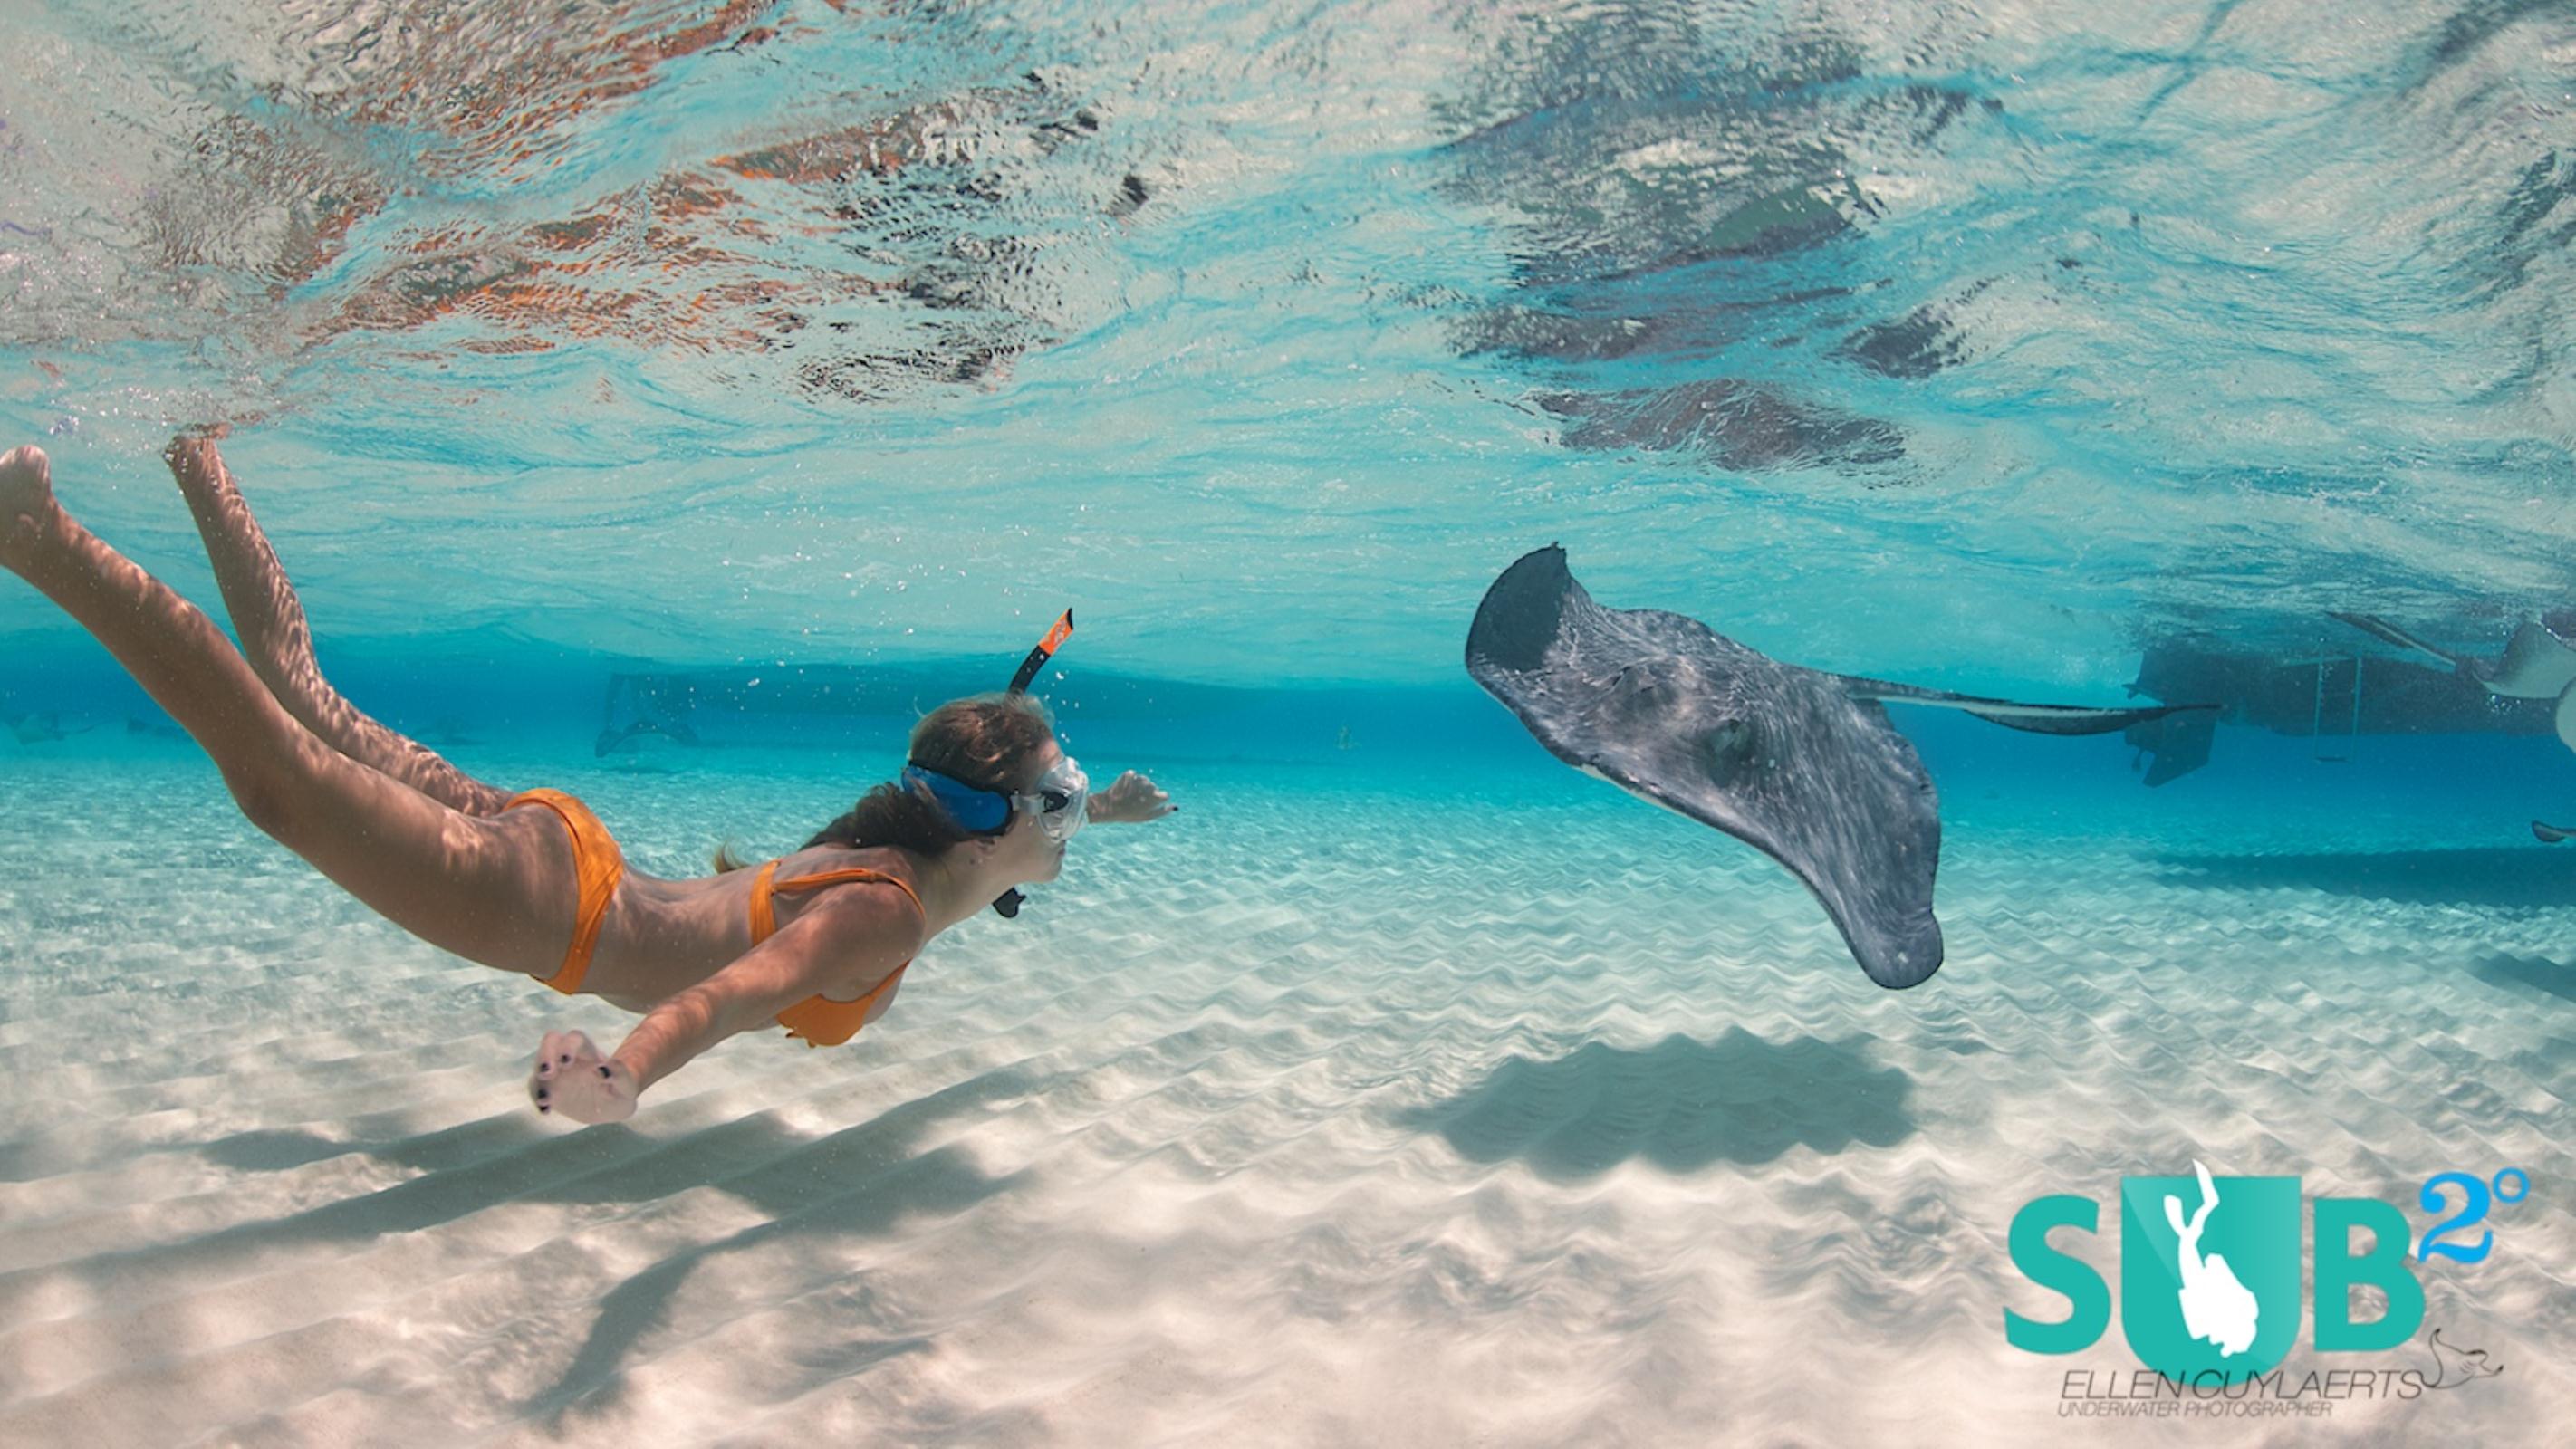 When entering the clear blue water, stingrays give you a warm welcome!